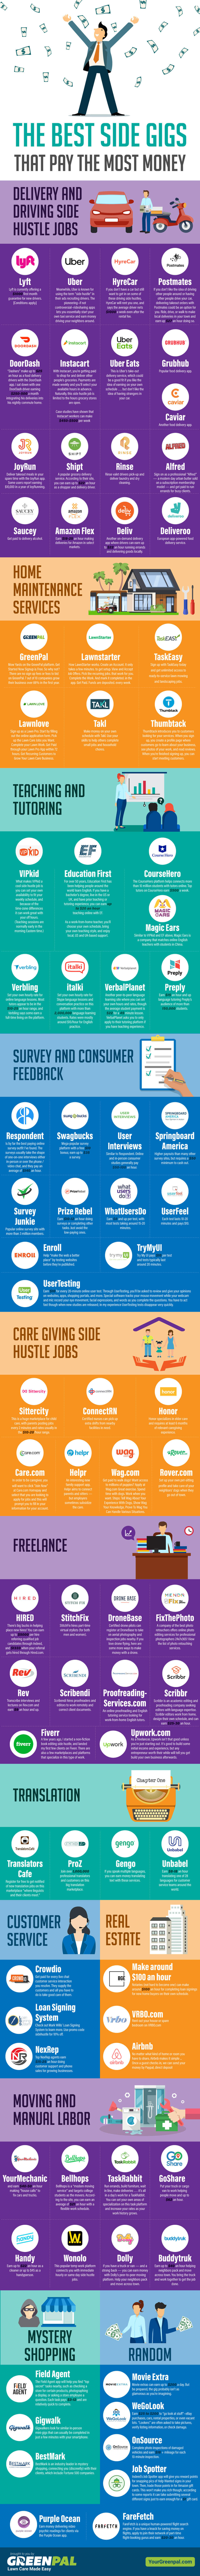 99 Side Hustle Ideas You Can Start Today